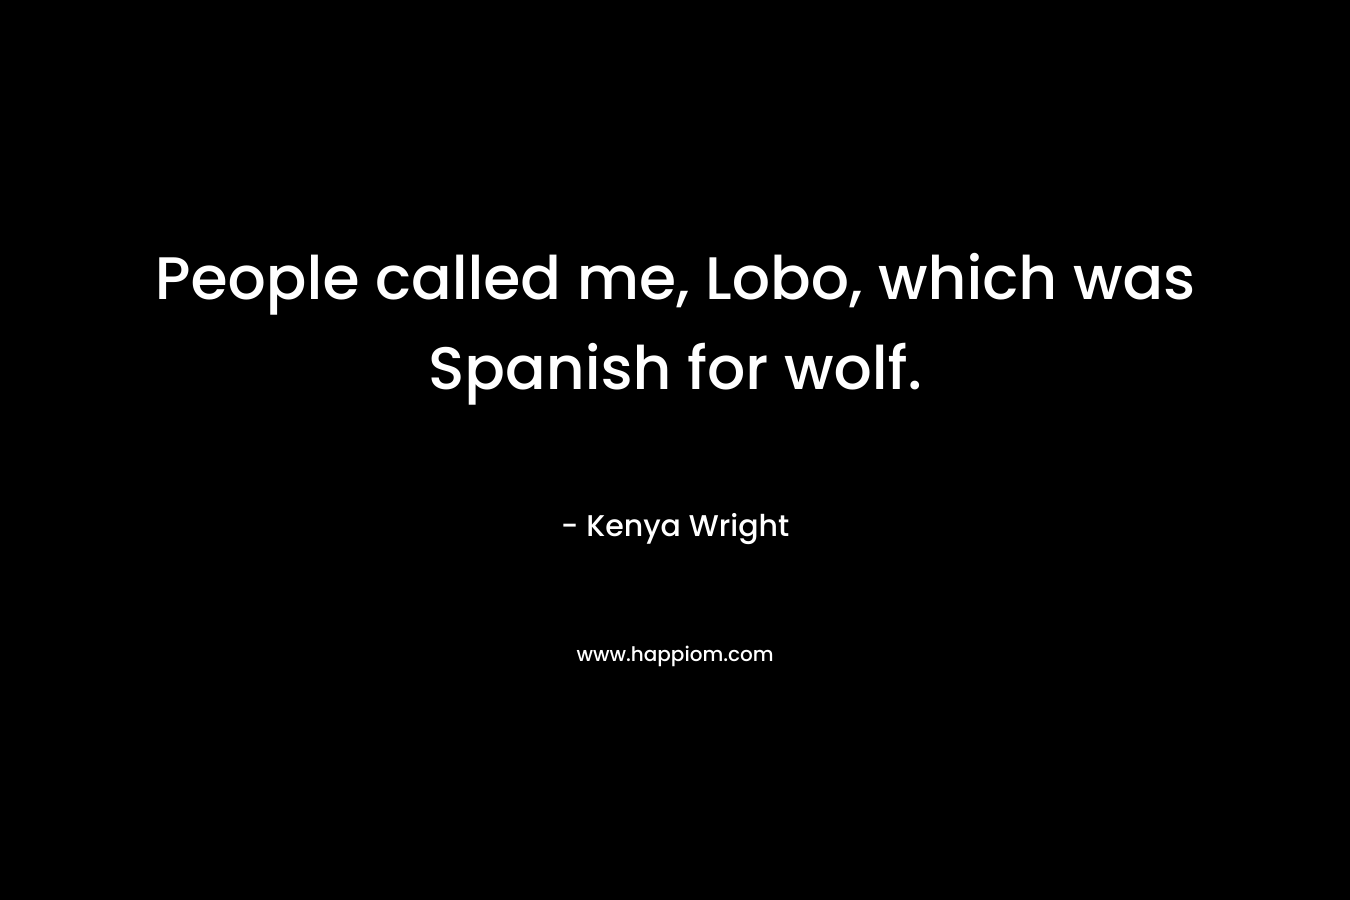 People called me, Lobo, which was Spanish for wolf. – Kenya Wright